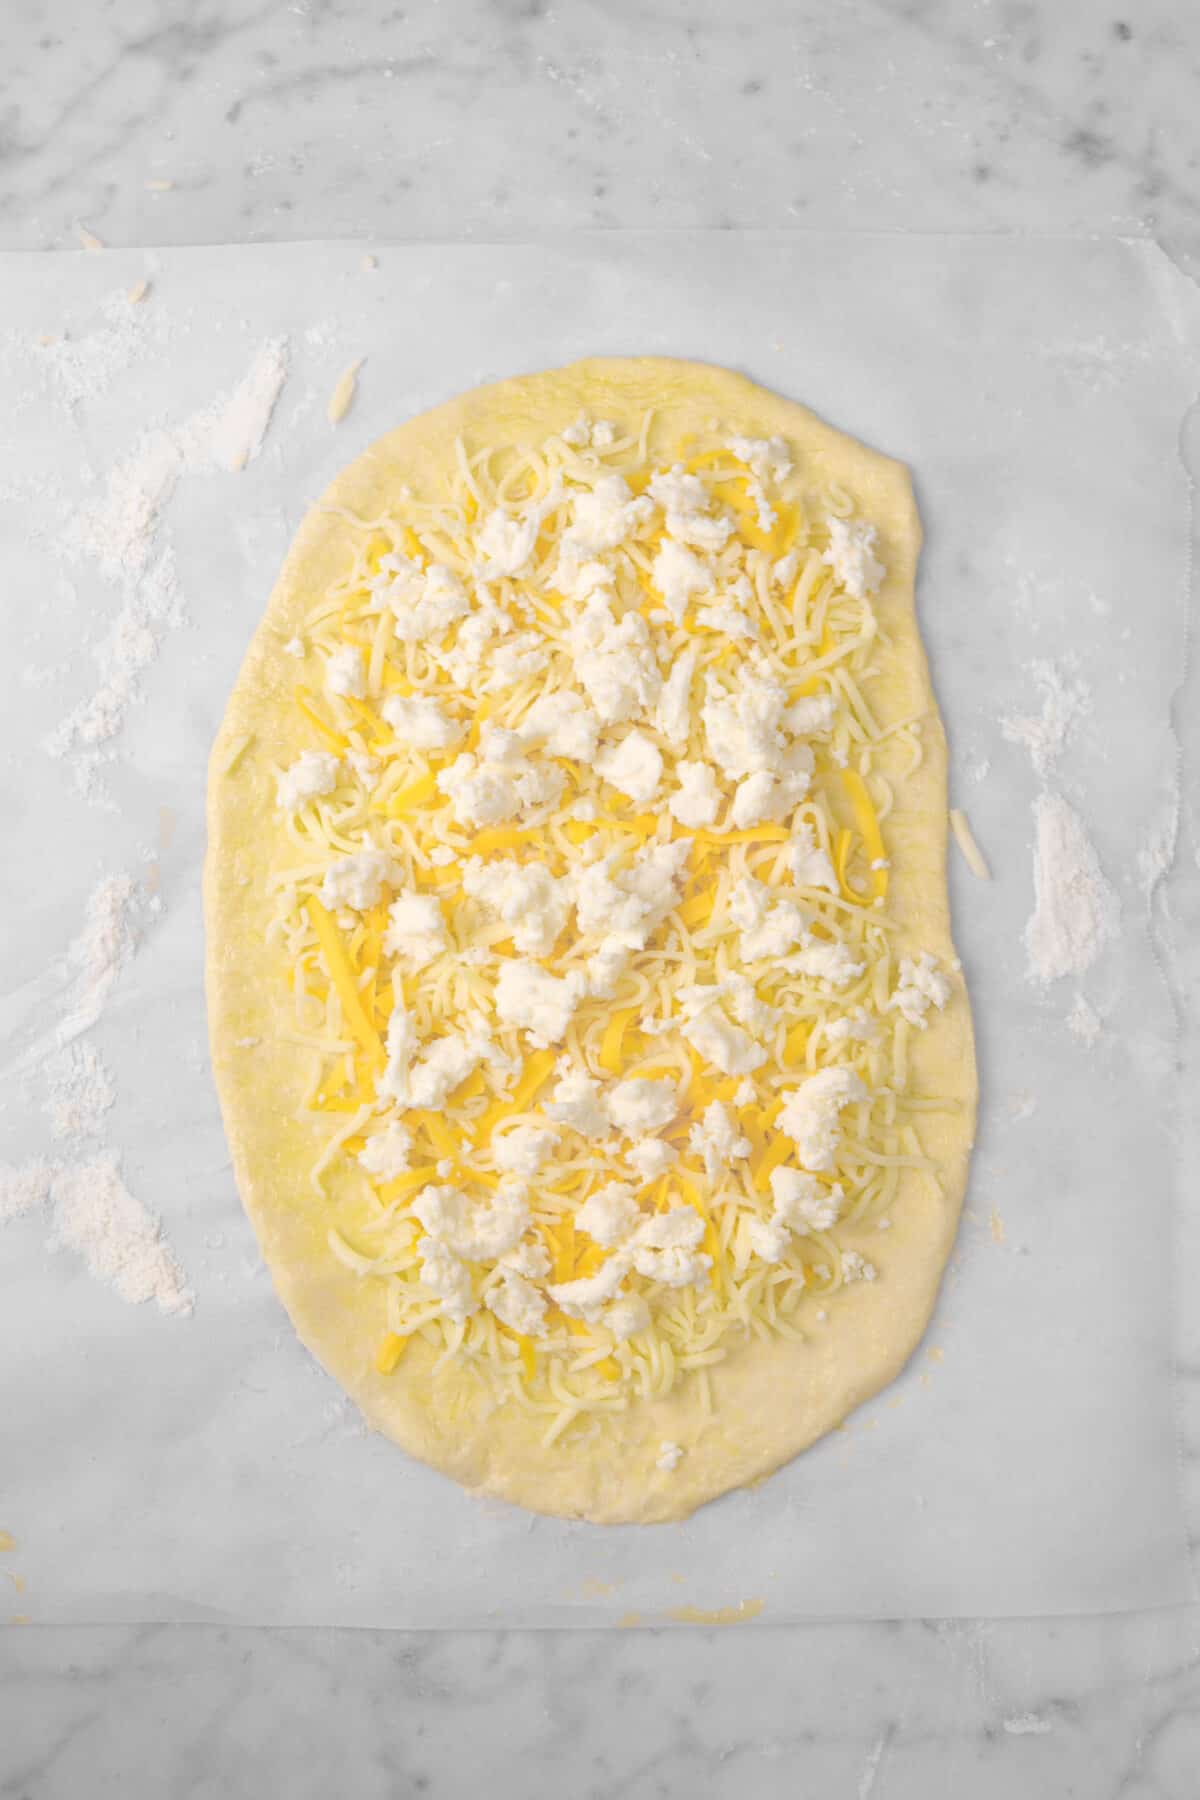 pizza dough rolled out with three cheeses spread over the top